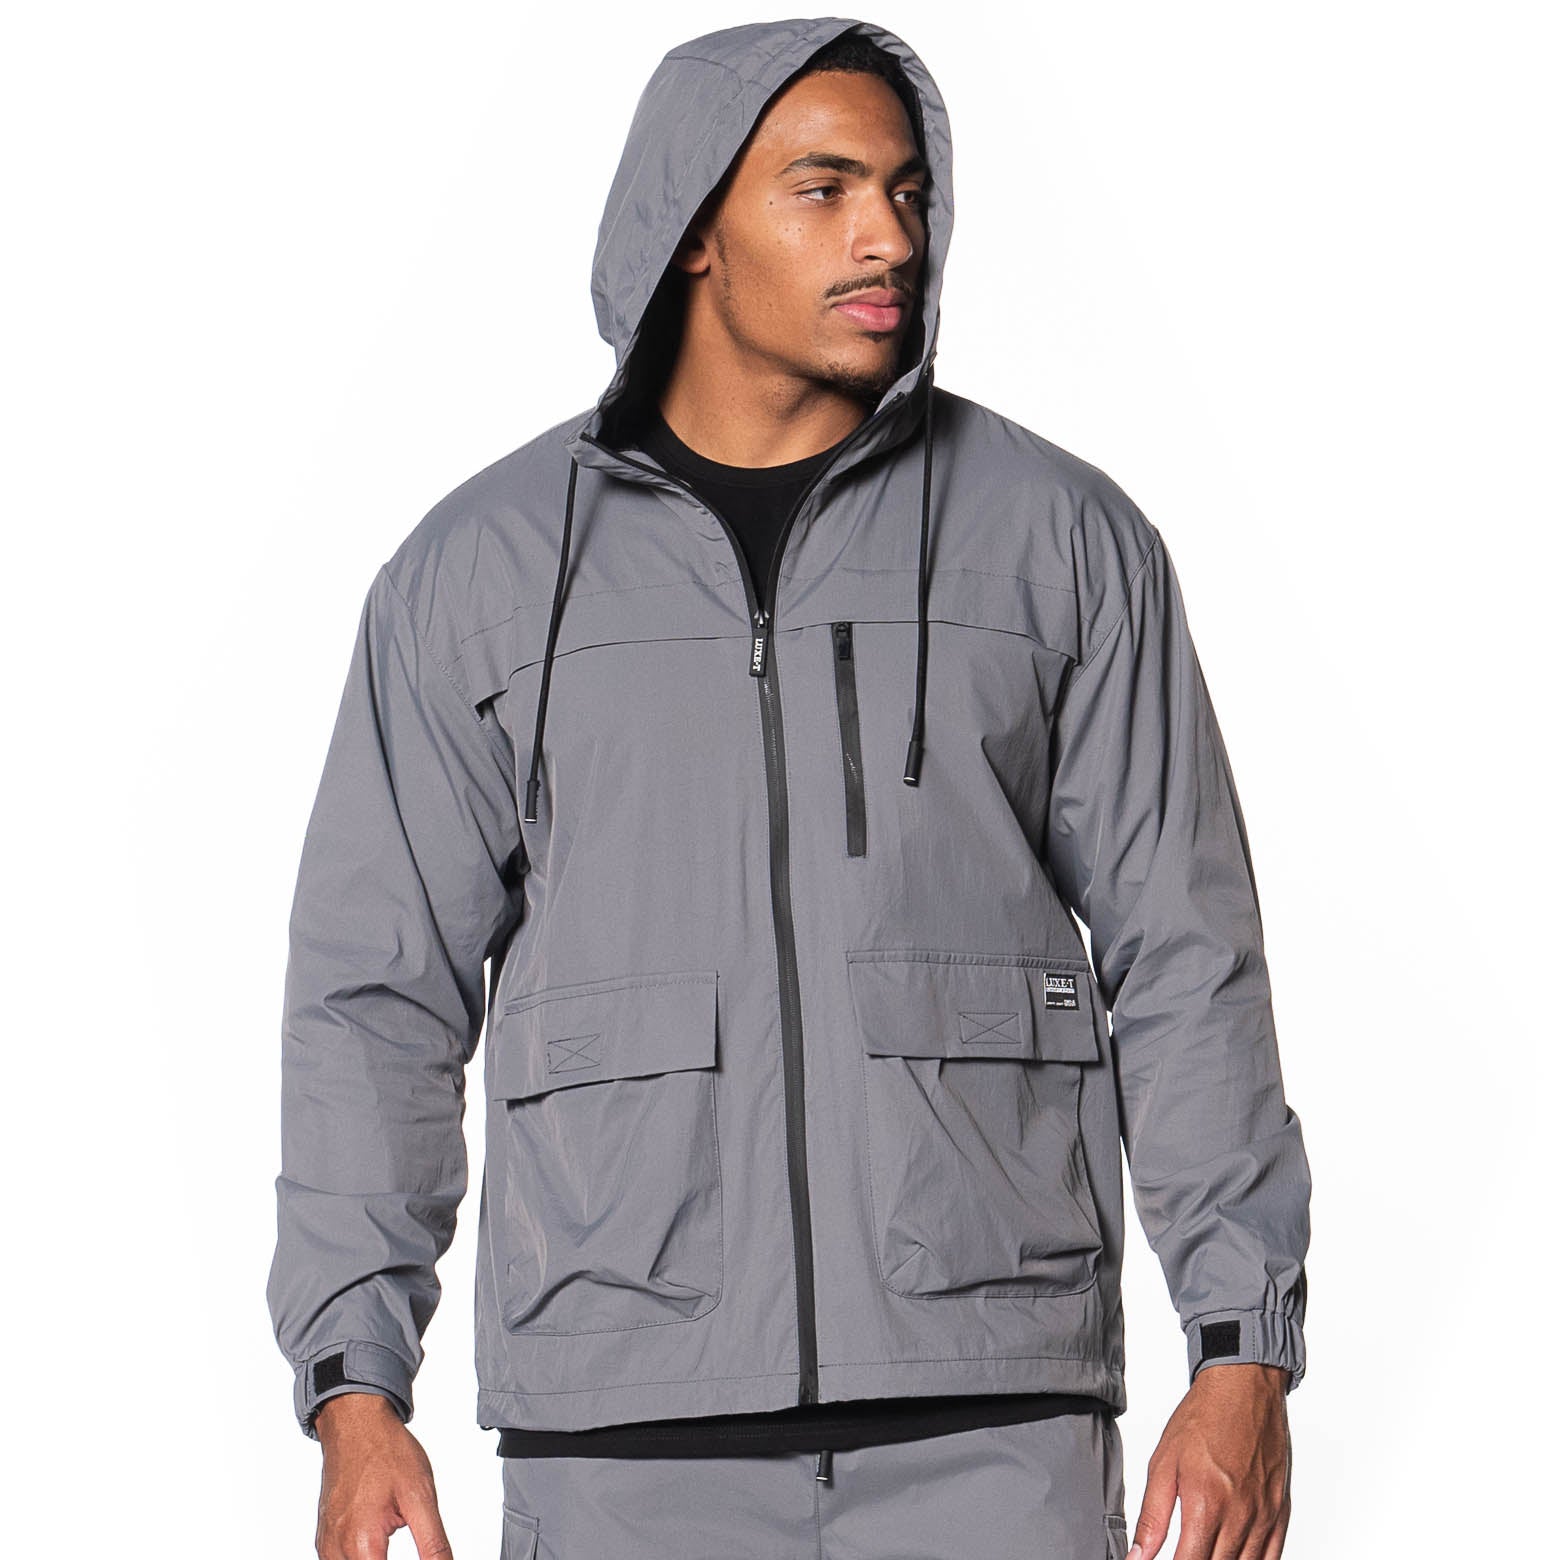 YUHAOTIN Waterproof Jacket and Trousers Work Trousers Men Lounge